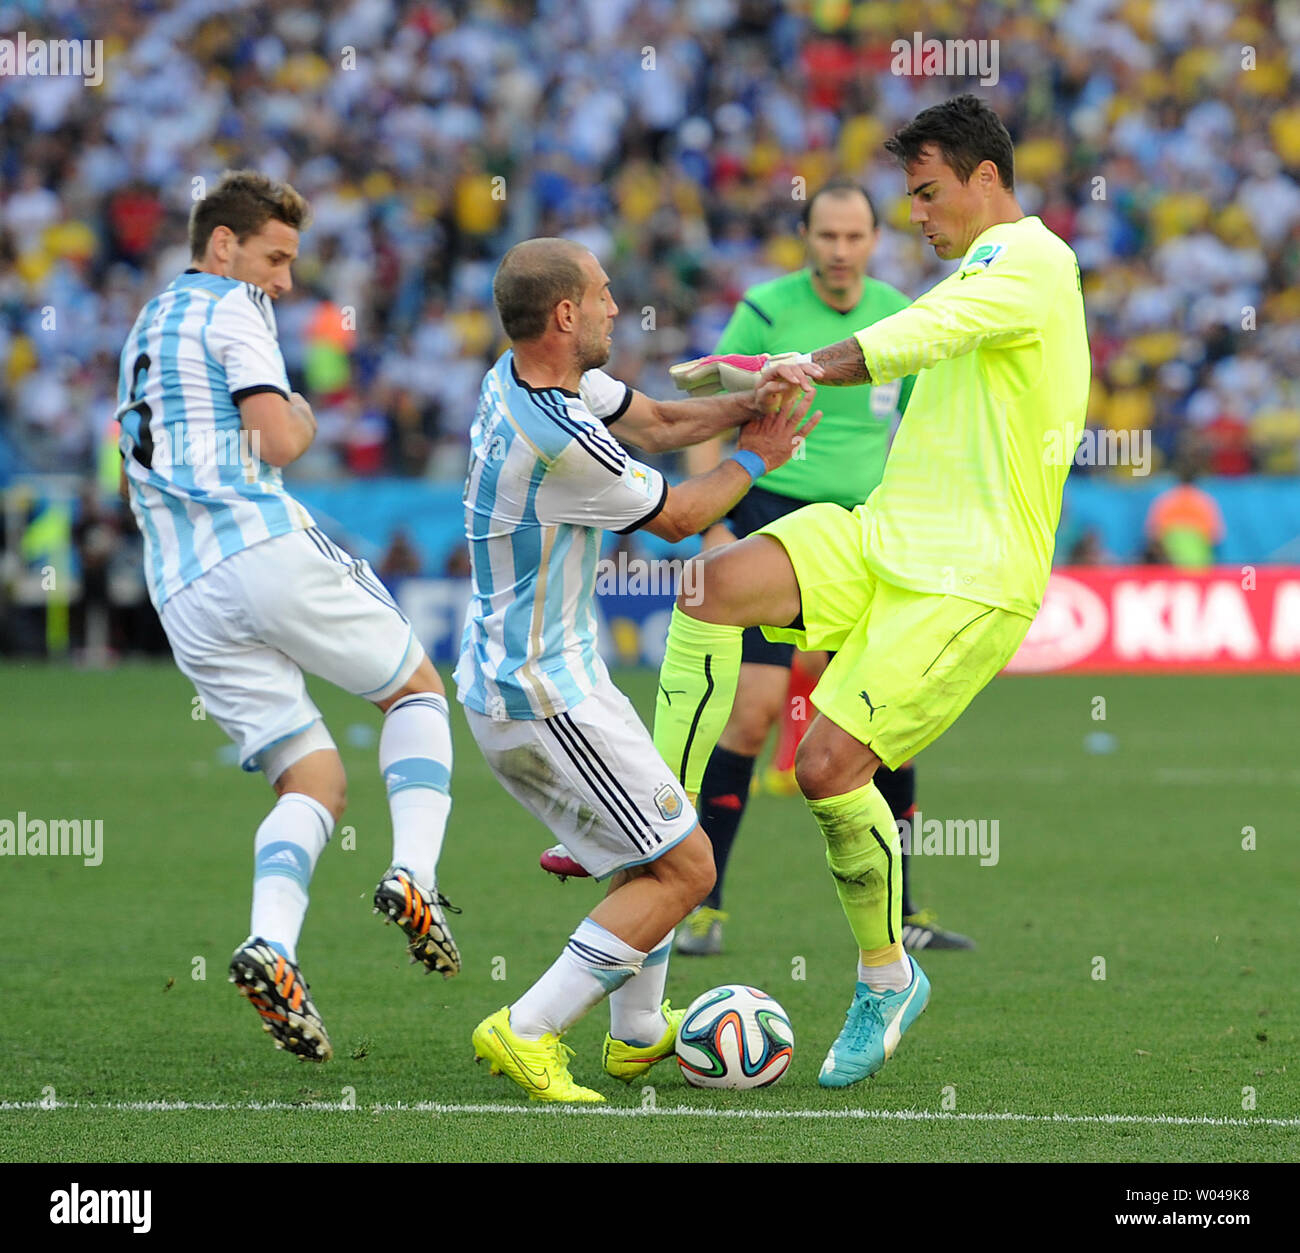 Pablo Zabaleta (C) of Argentina competes with Diego Benaglio of Switzerland during the 2014 FIFA World Cup Round of 16 match at the Arena Corinthians in Sao Paulo, Brazil on July 01, 2014. UPI/Chris Brunskill Stock Photo